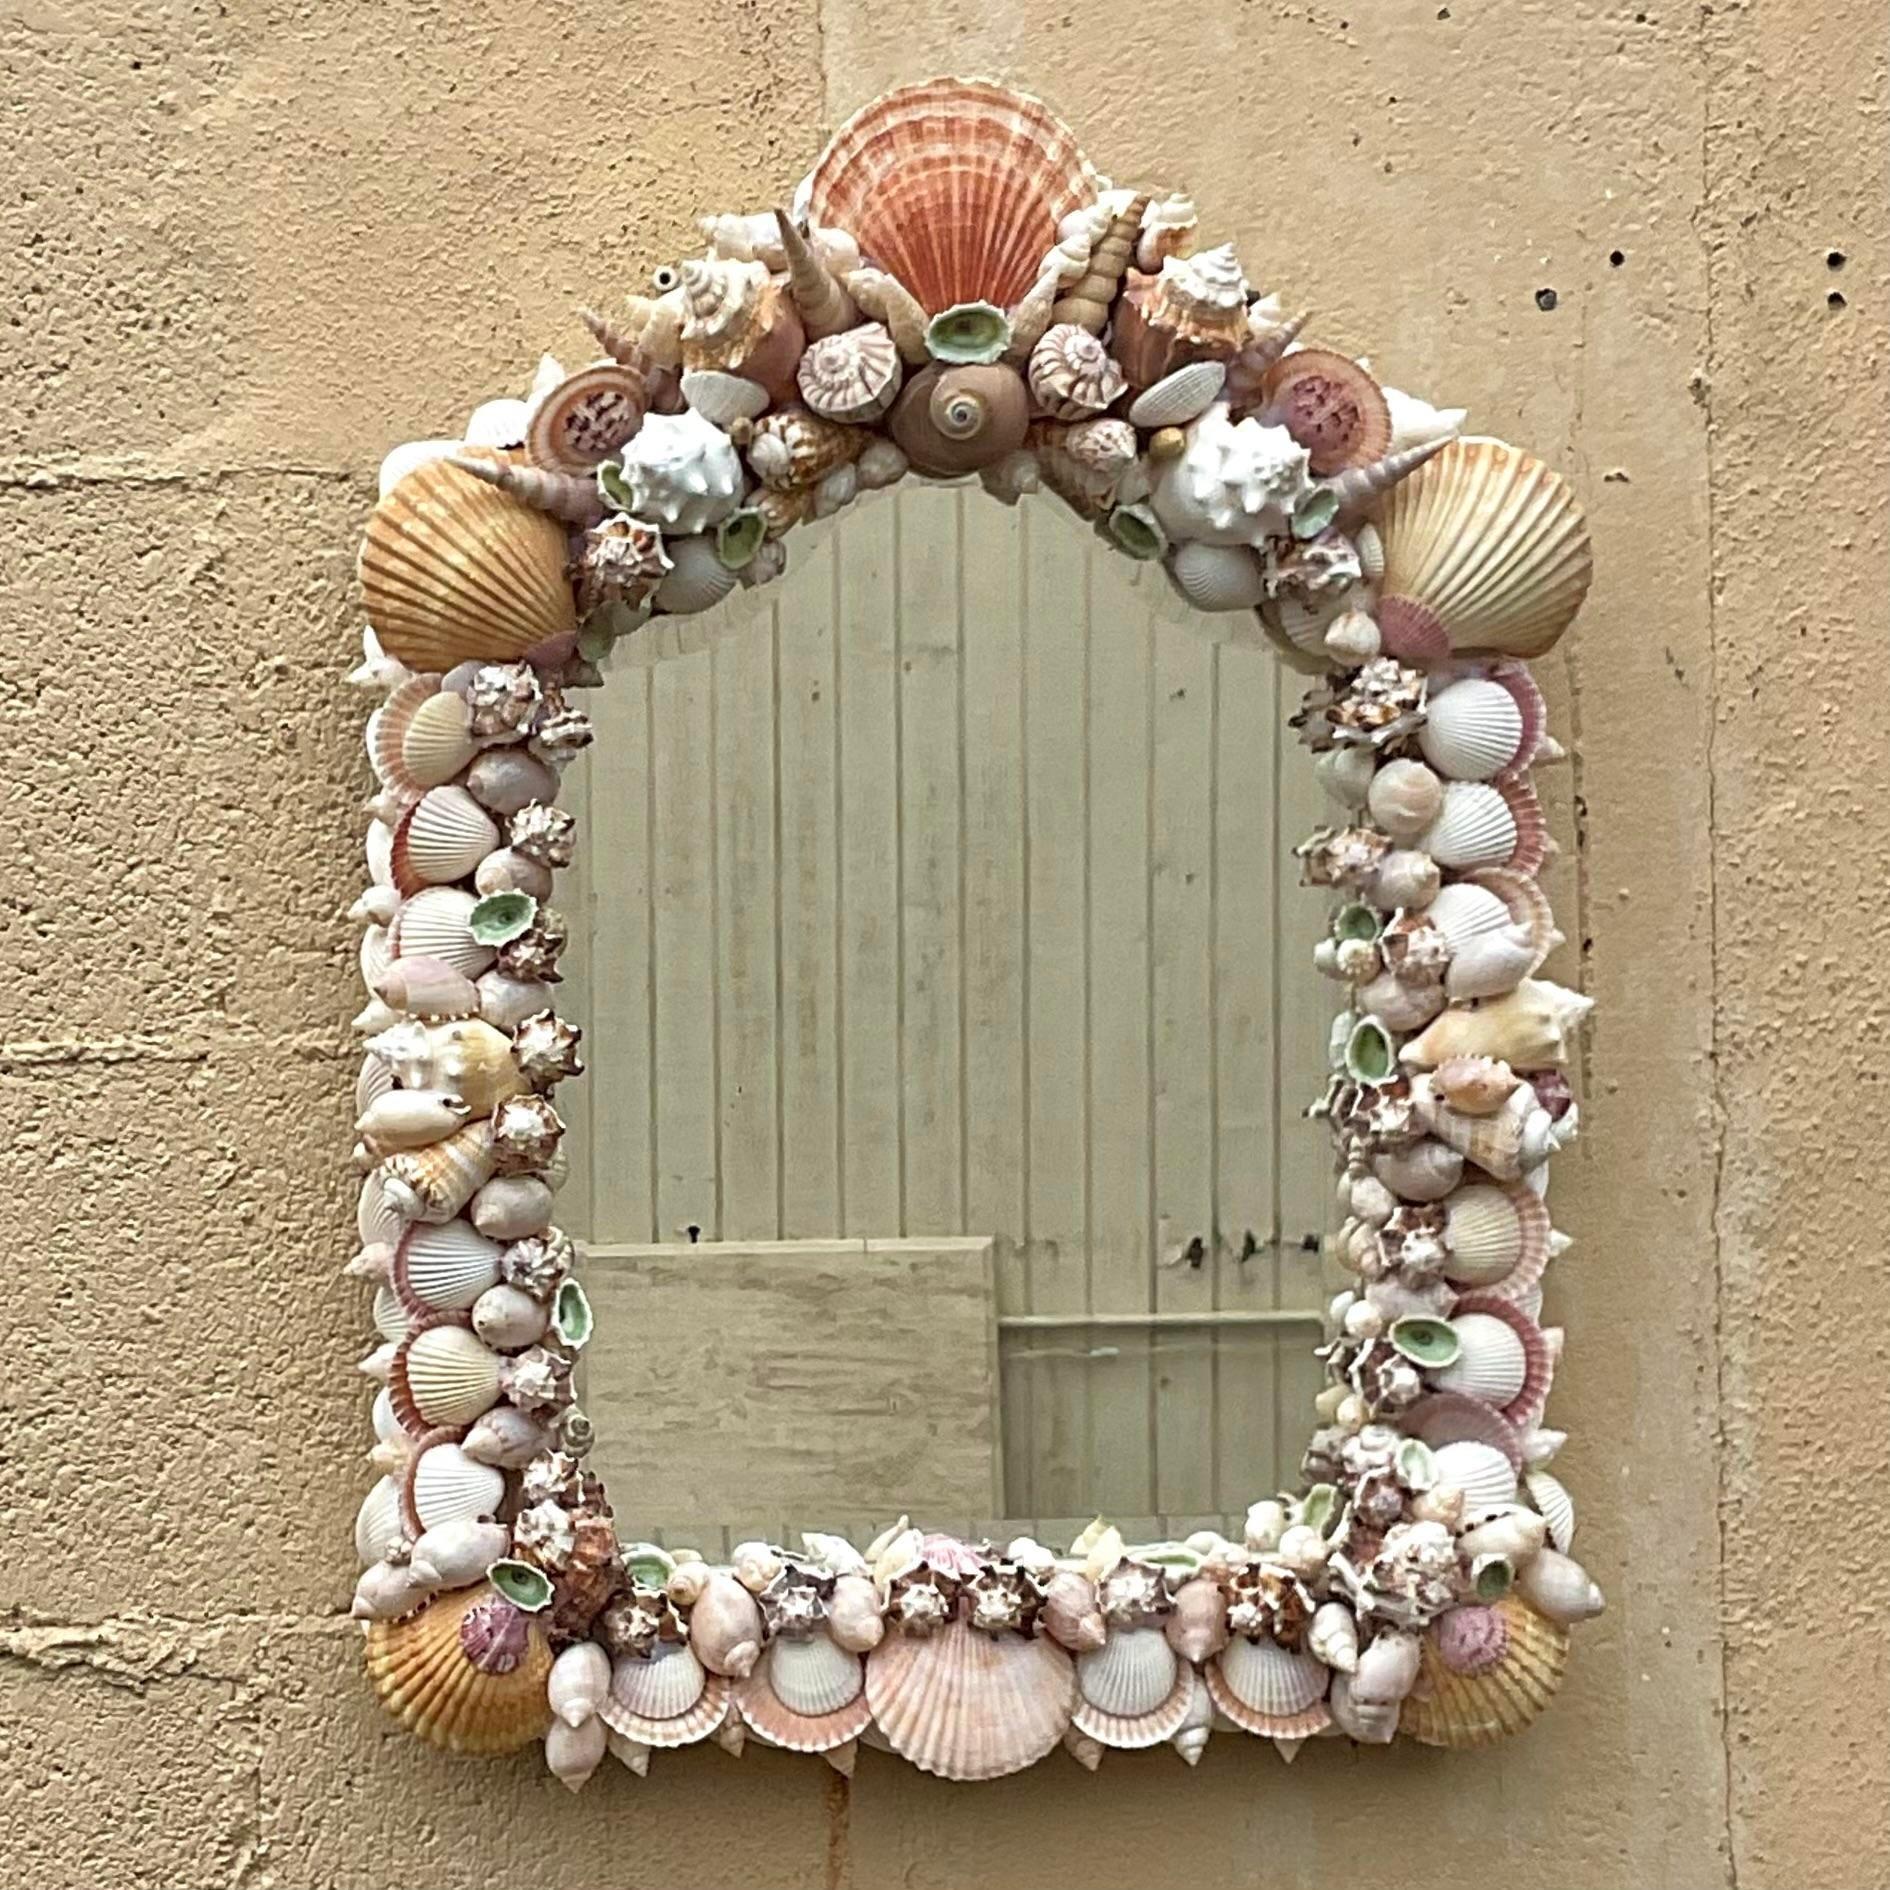 Embrace the timeless allure of coastal living with our Vintage Coastal Handmade Shell Mirror. Handcrafted with care, each shell delicately placed to evoke the spirit of American seaside charm. Reflecting both craftsmanship and coastal beauty, this